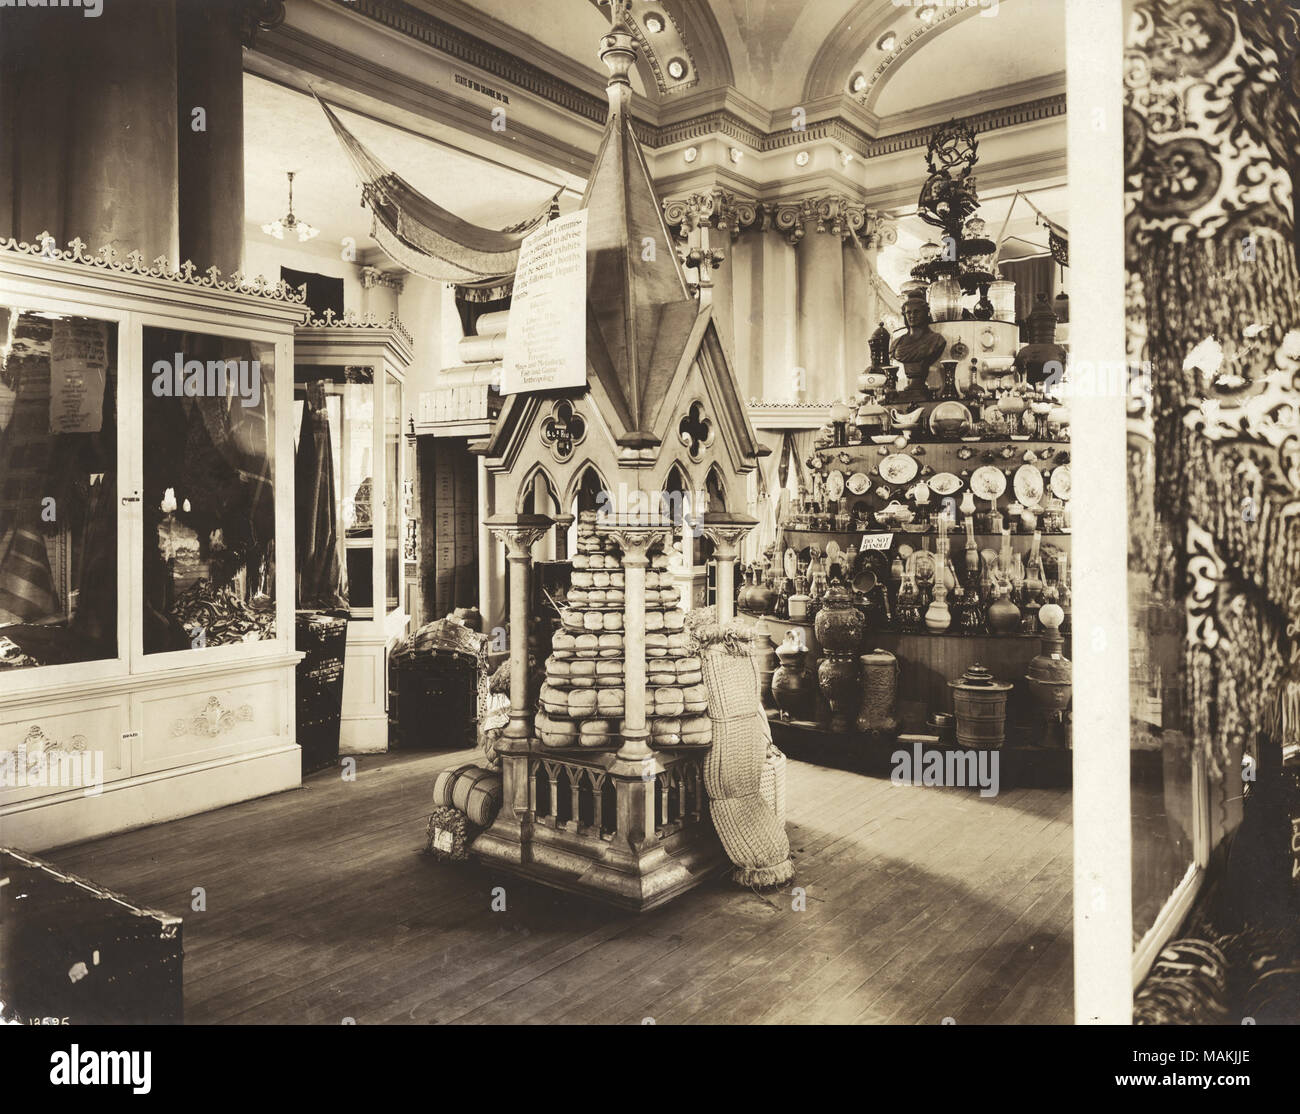 Horizontal, sepia photograph showing several product displays. In the center of the photograph is a display built to look like a small building with a steeple-like roof. To the right of that display is a tiered circular case featuring sculpture, plates and pottery. Title: Interior of Brazil's exhibit in the Palace of Manufactures at the 1904 World's Fair.  . 1904. Official Photographic Company Stock Photo